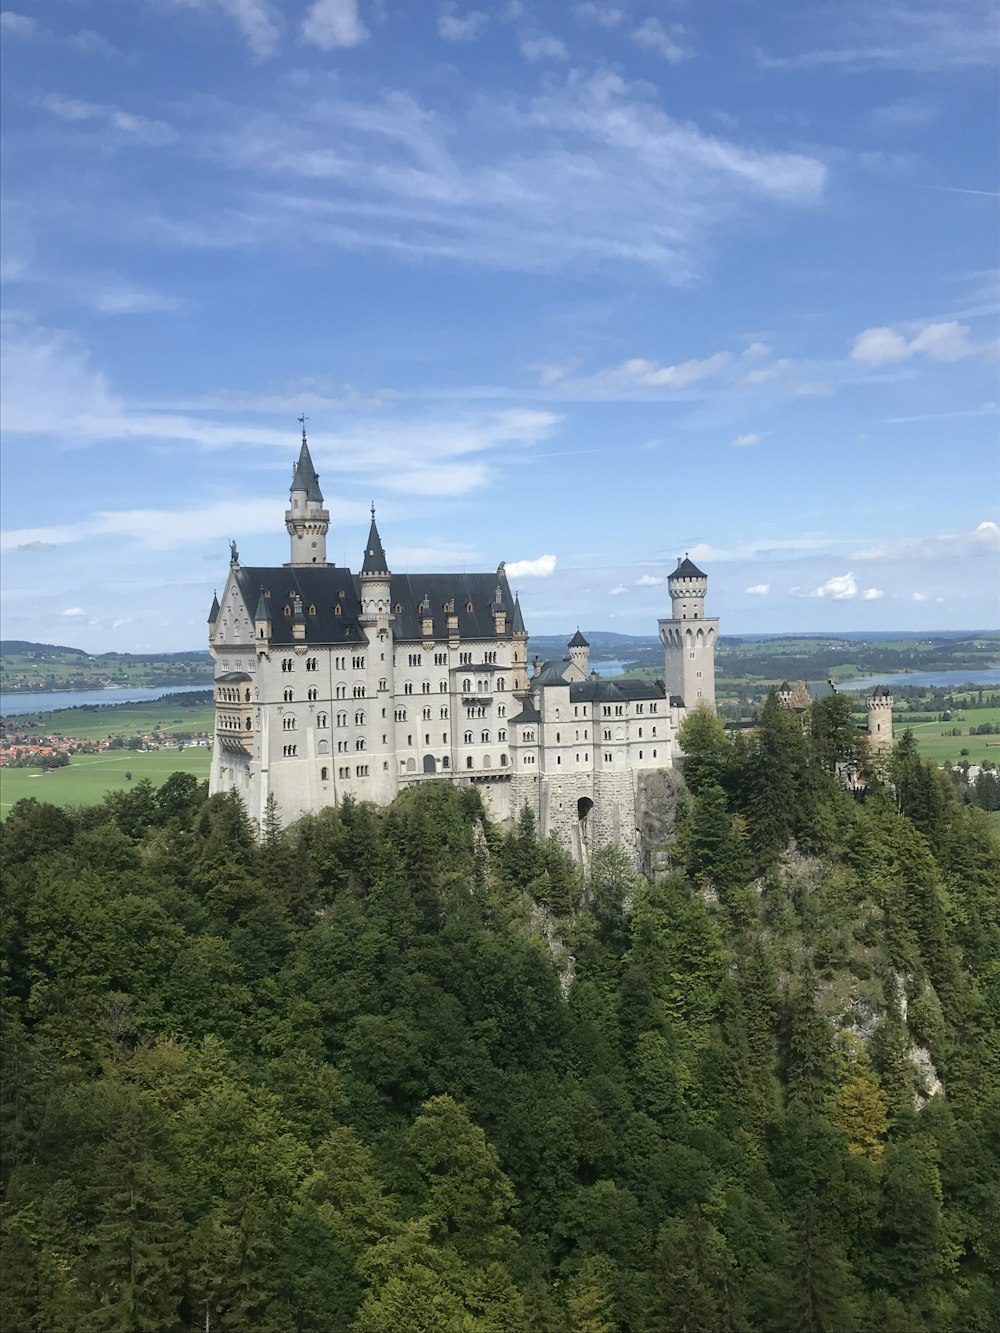 a large castle on a hill with Neuschwanstein Castle in the background